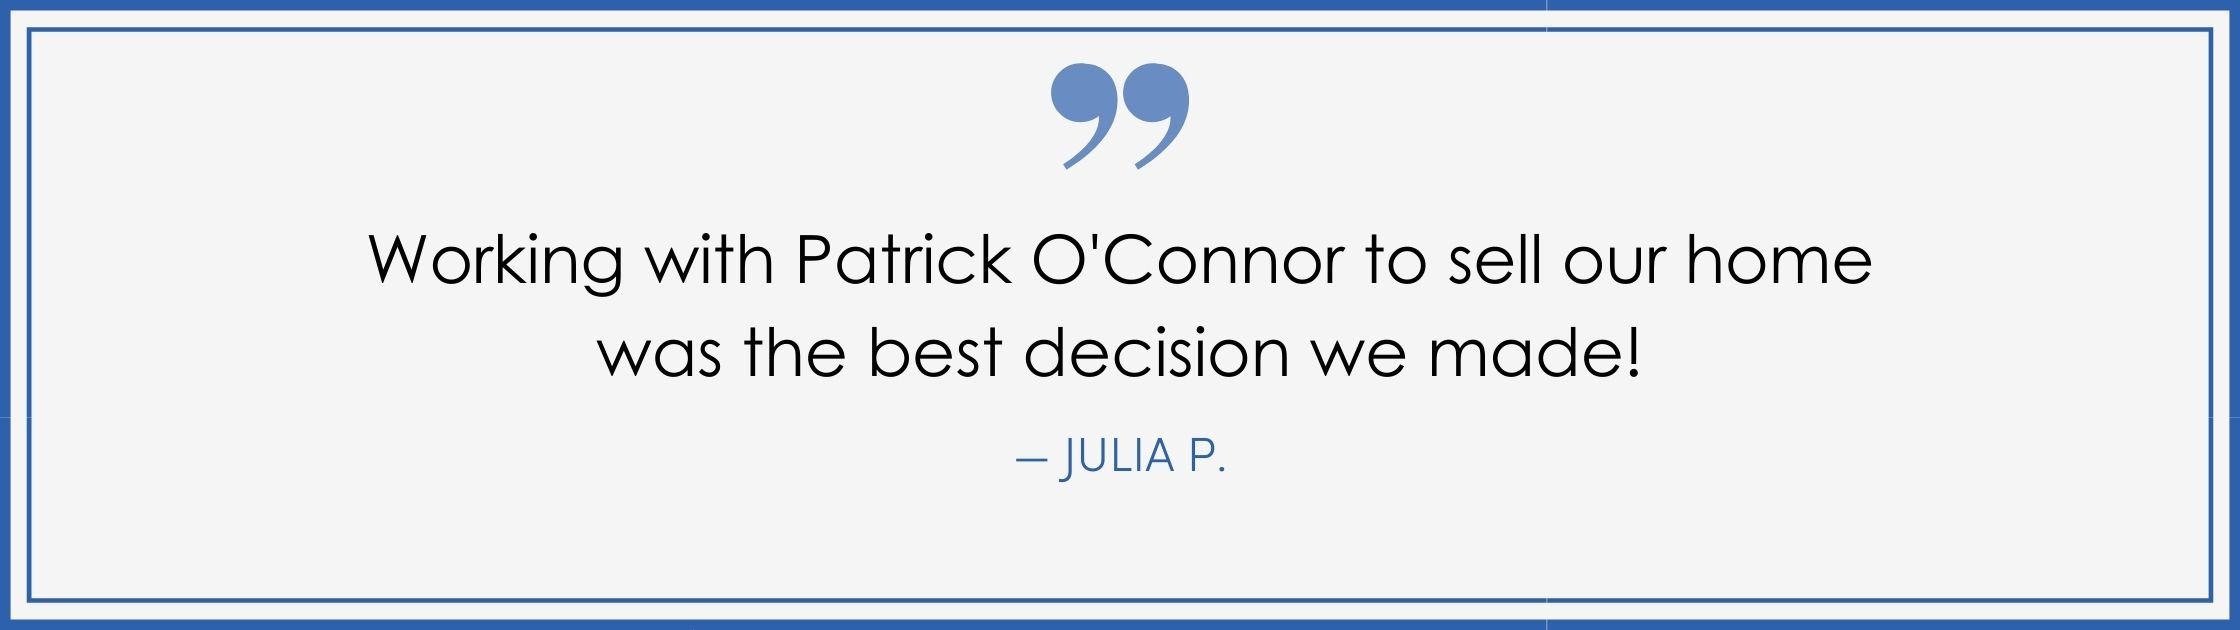 “Working with Patrick O’Connor to sell our home was the best decision we made!” –Julia P. (Copy) (Copy)